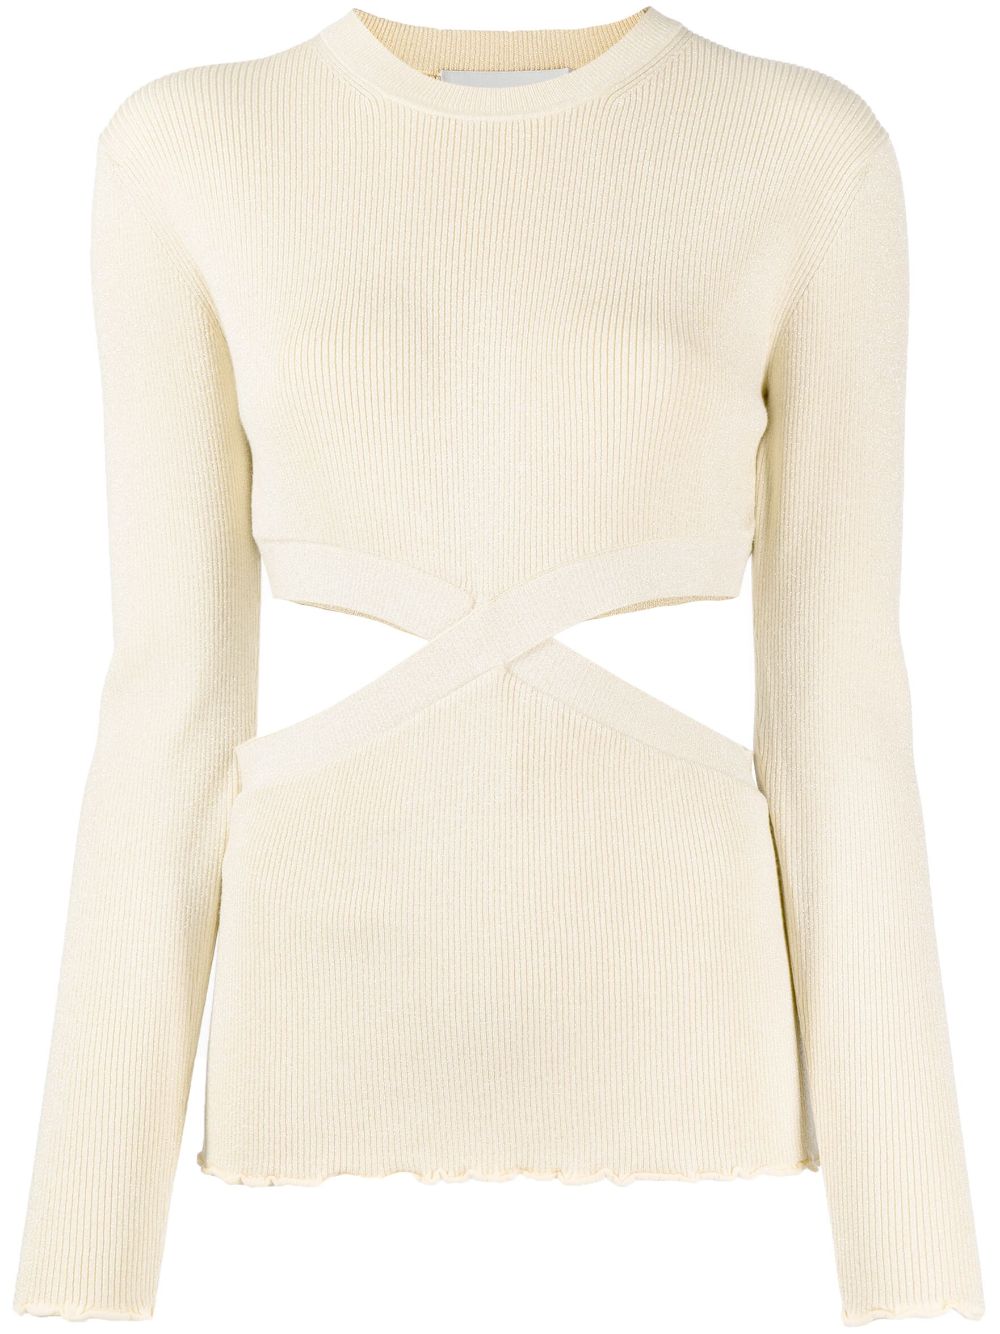 3.1 Phillip Lim / フィリップ リム Lurex Cut-out Knitted Top In Neutrals